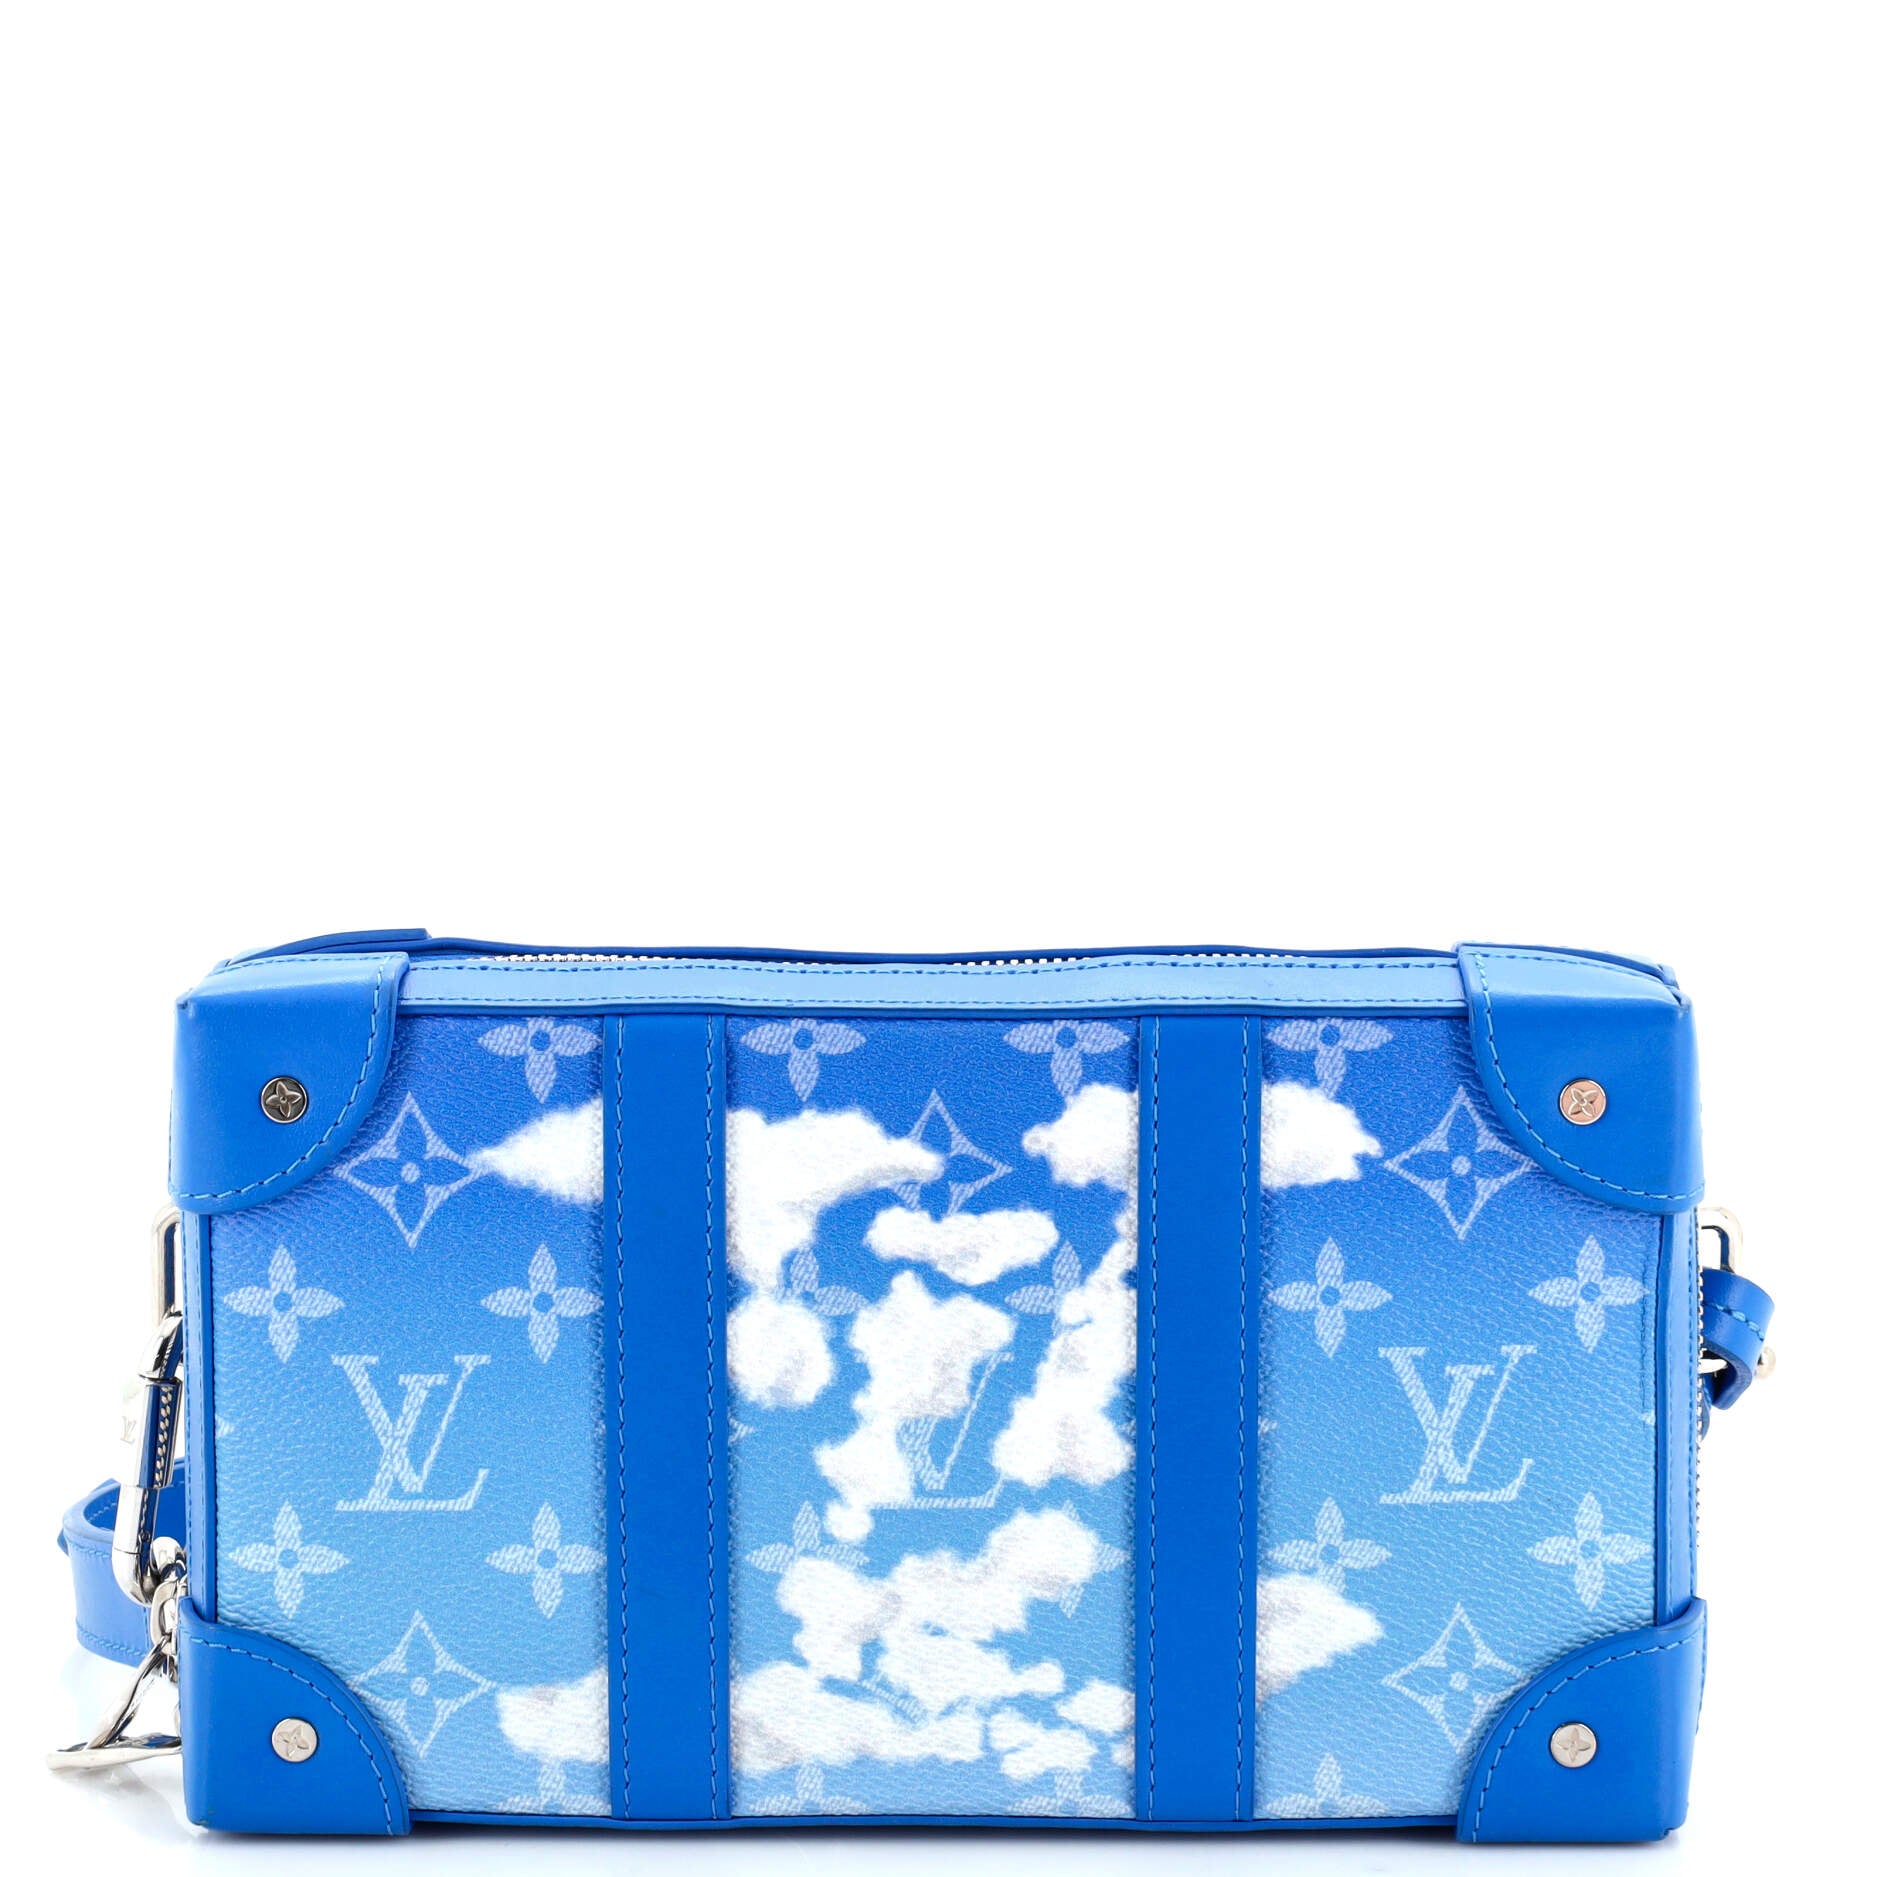 Soft Trunk Wallet Limited Edition Monogram Clouds